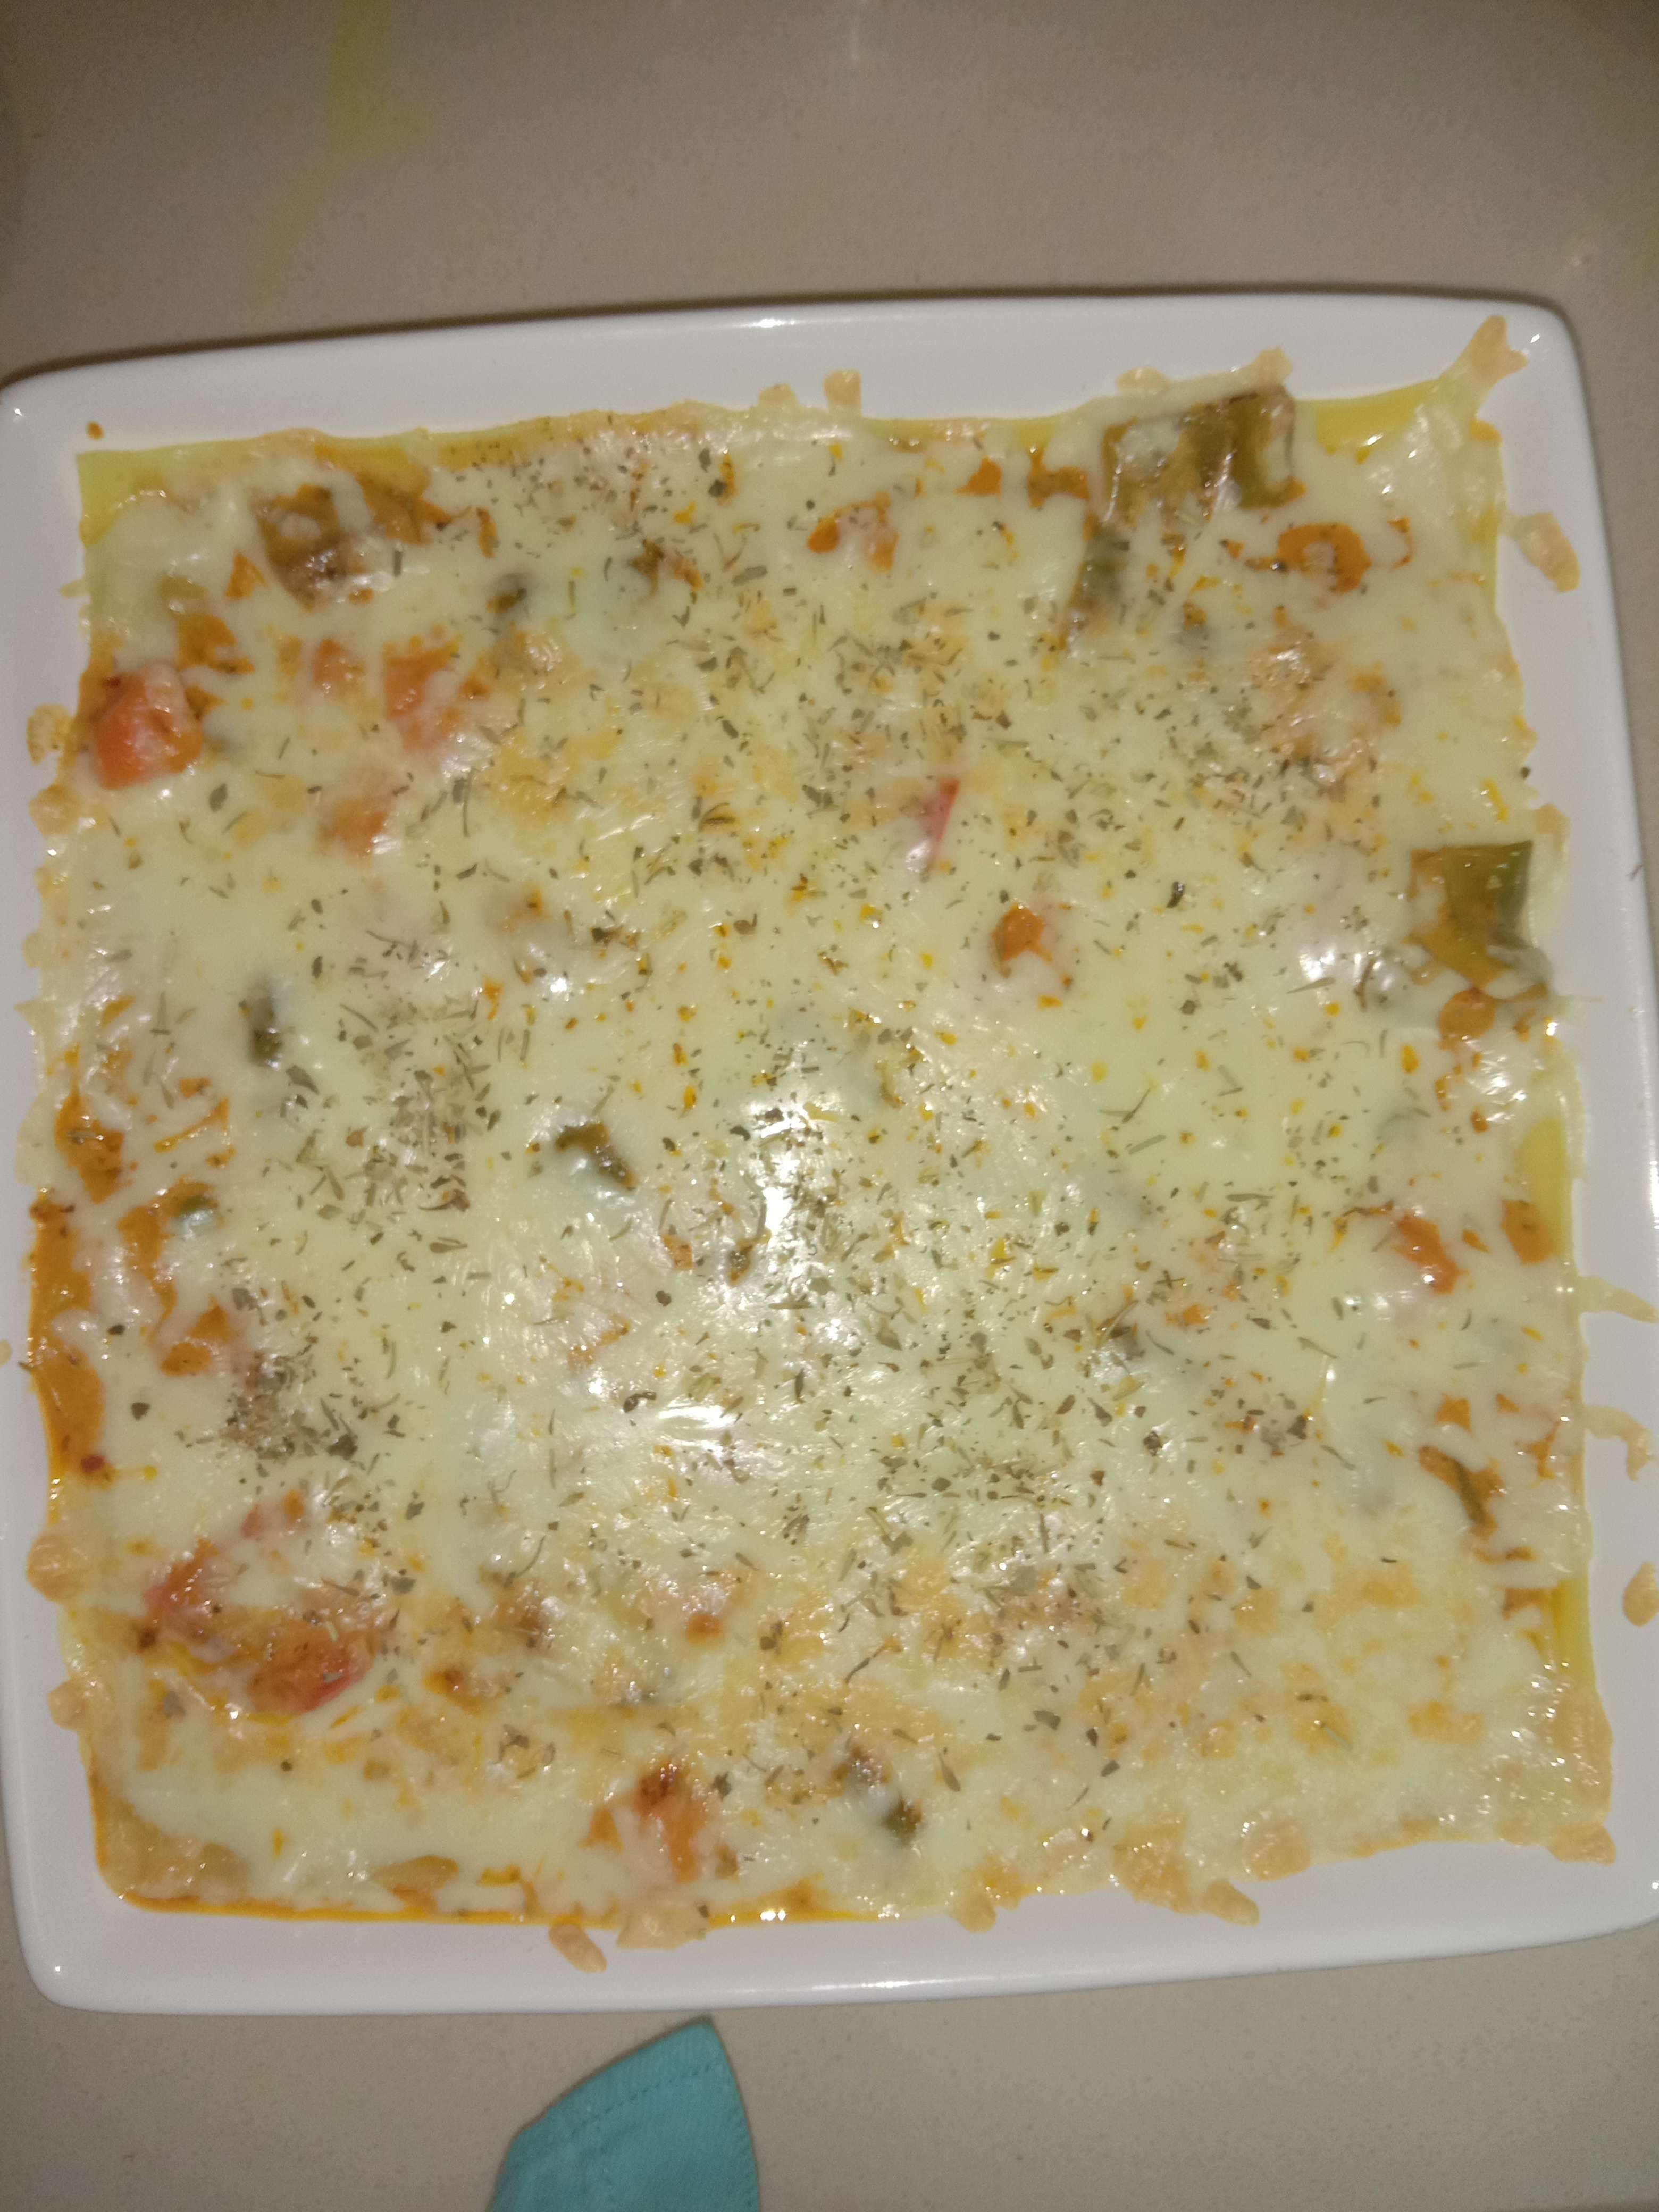 Tasty Veg Lasagna cooked by COOX chefs cooks during occasions parties events at home